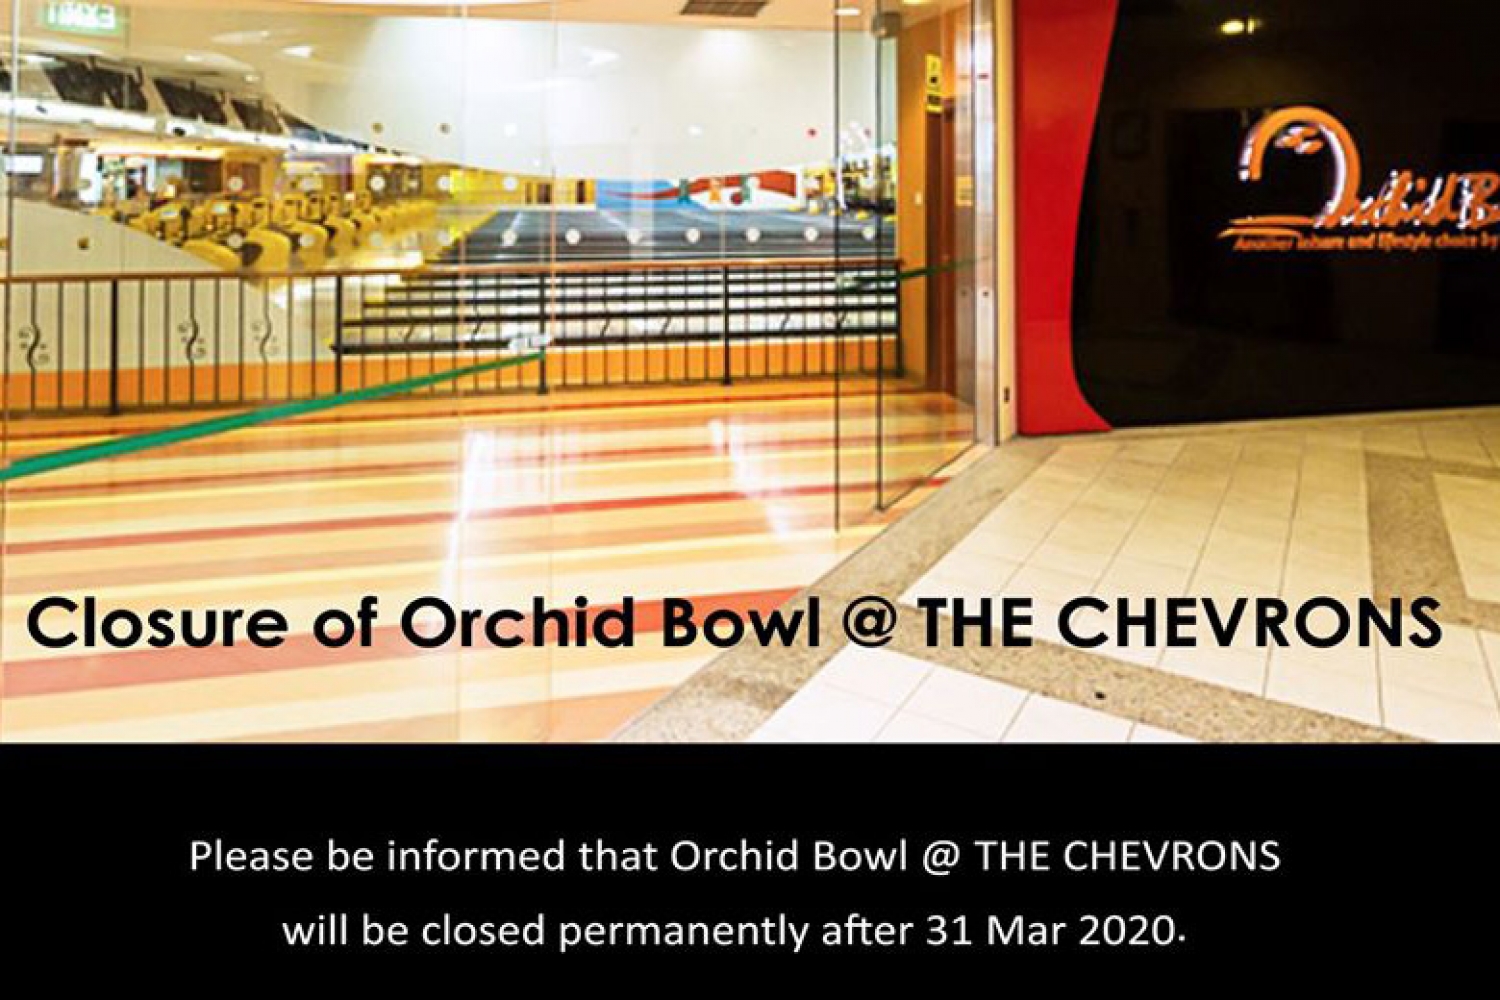 Closure Of Orchid Bowl The Chevrons After 31 Mar